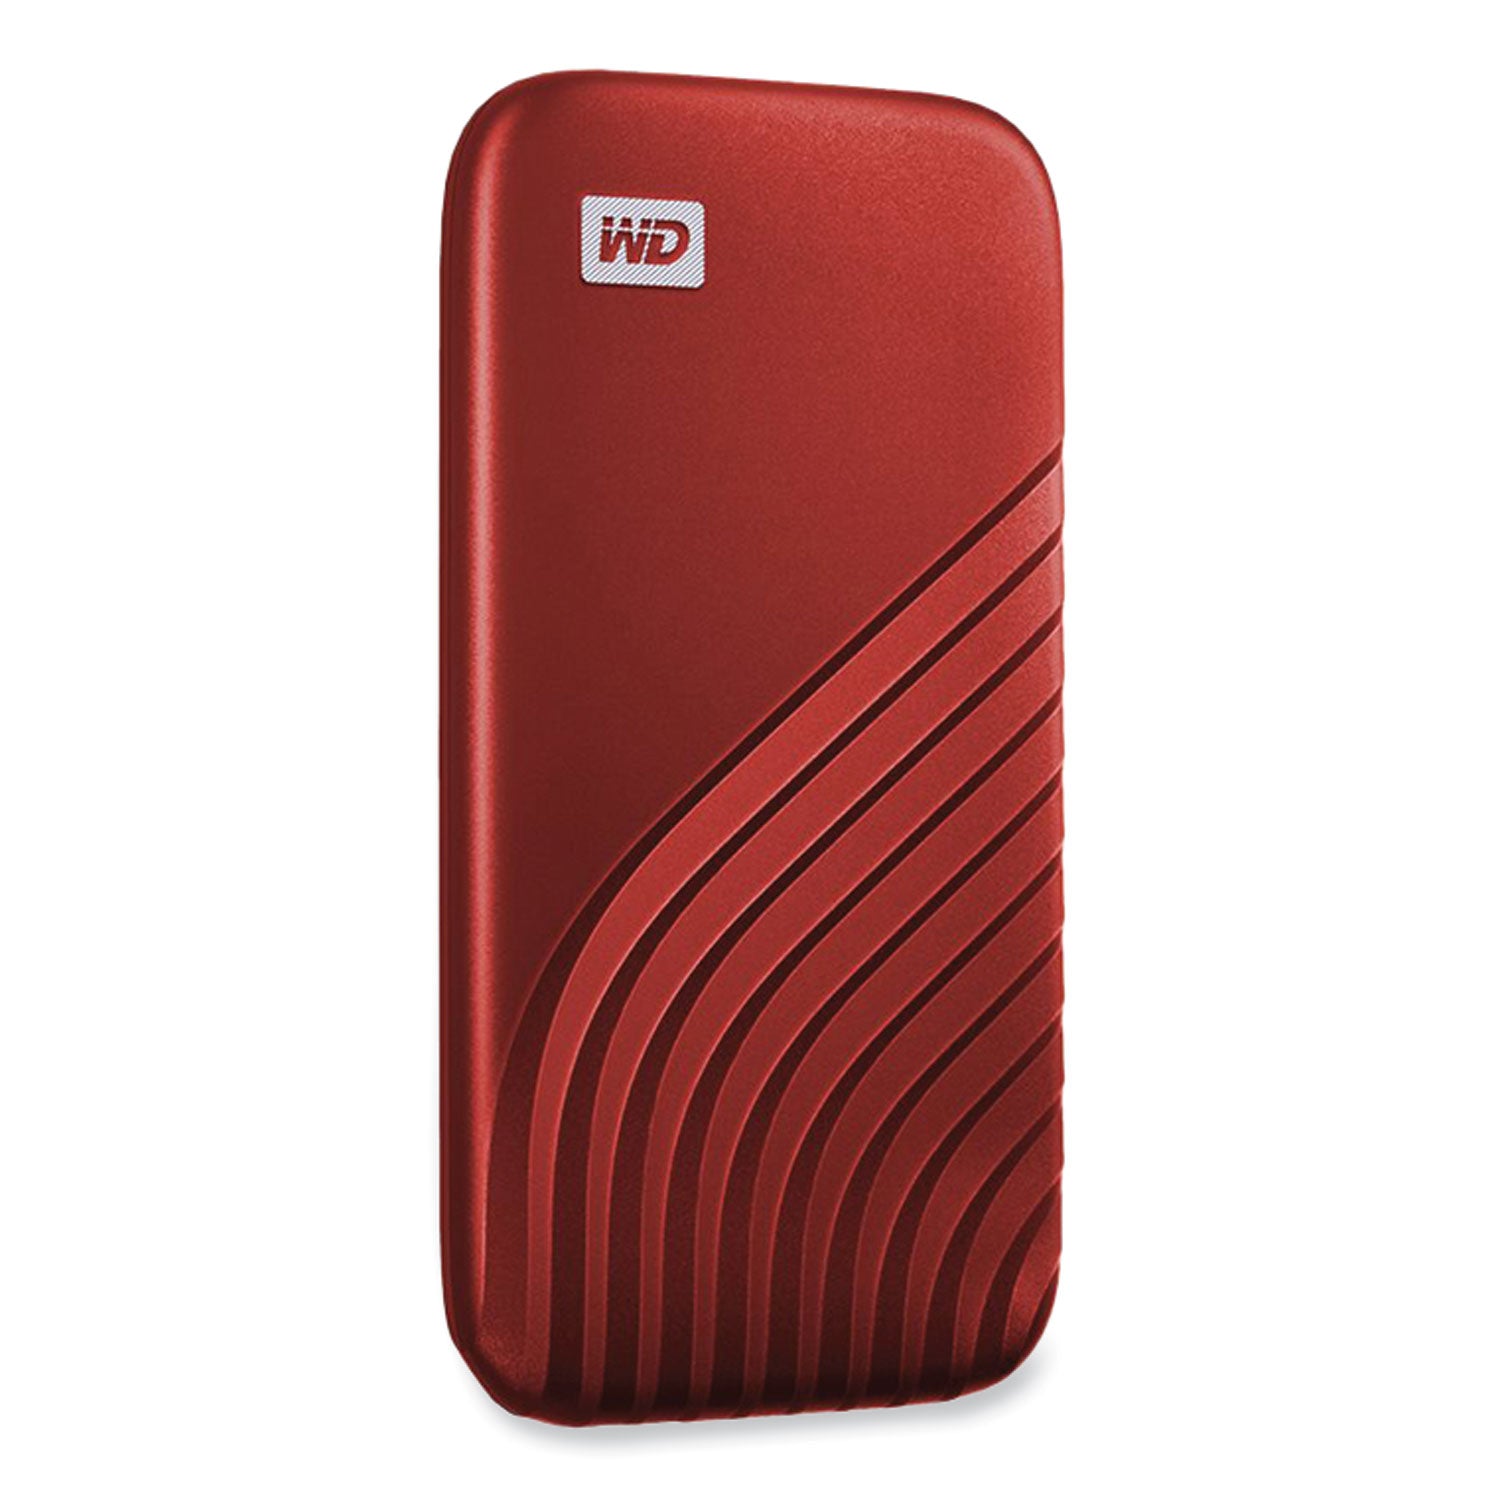 my-passport-external-solid-state-drive-1-tb-usb-32-red_wdcagf0010brd - 2